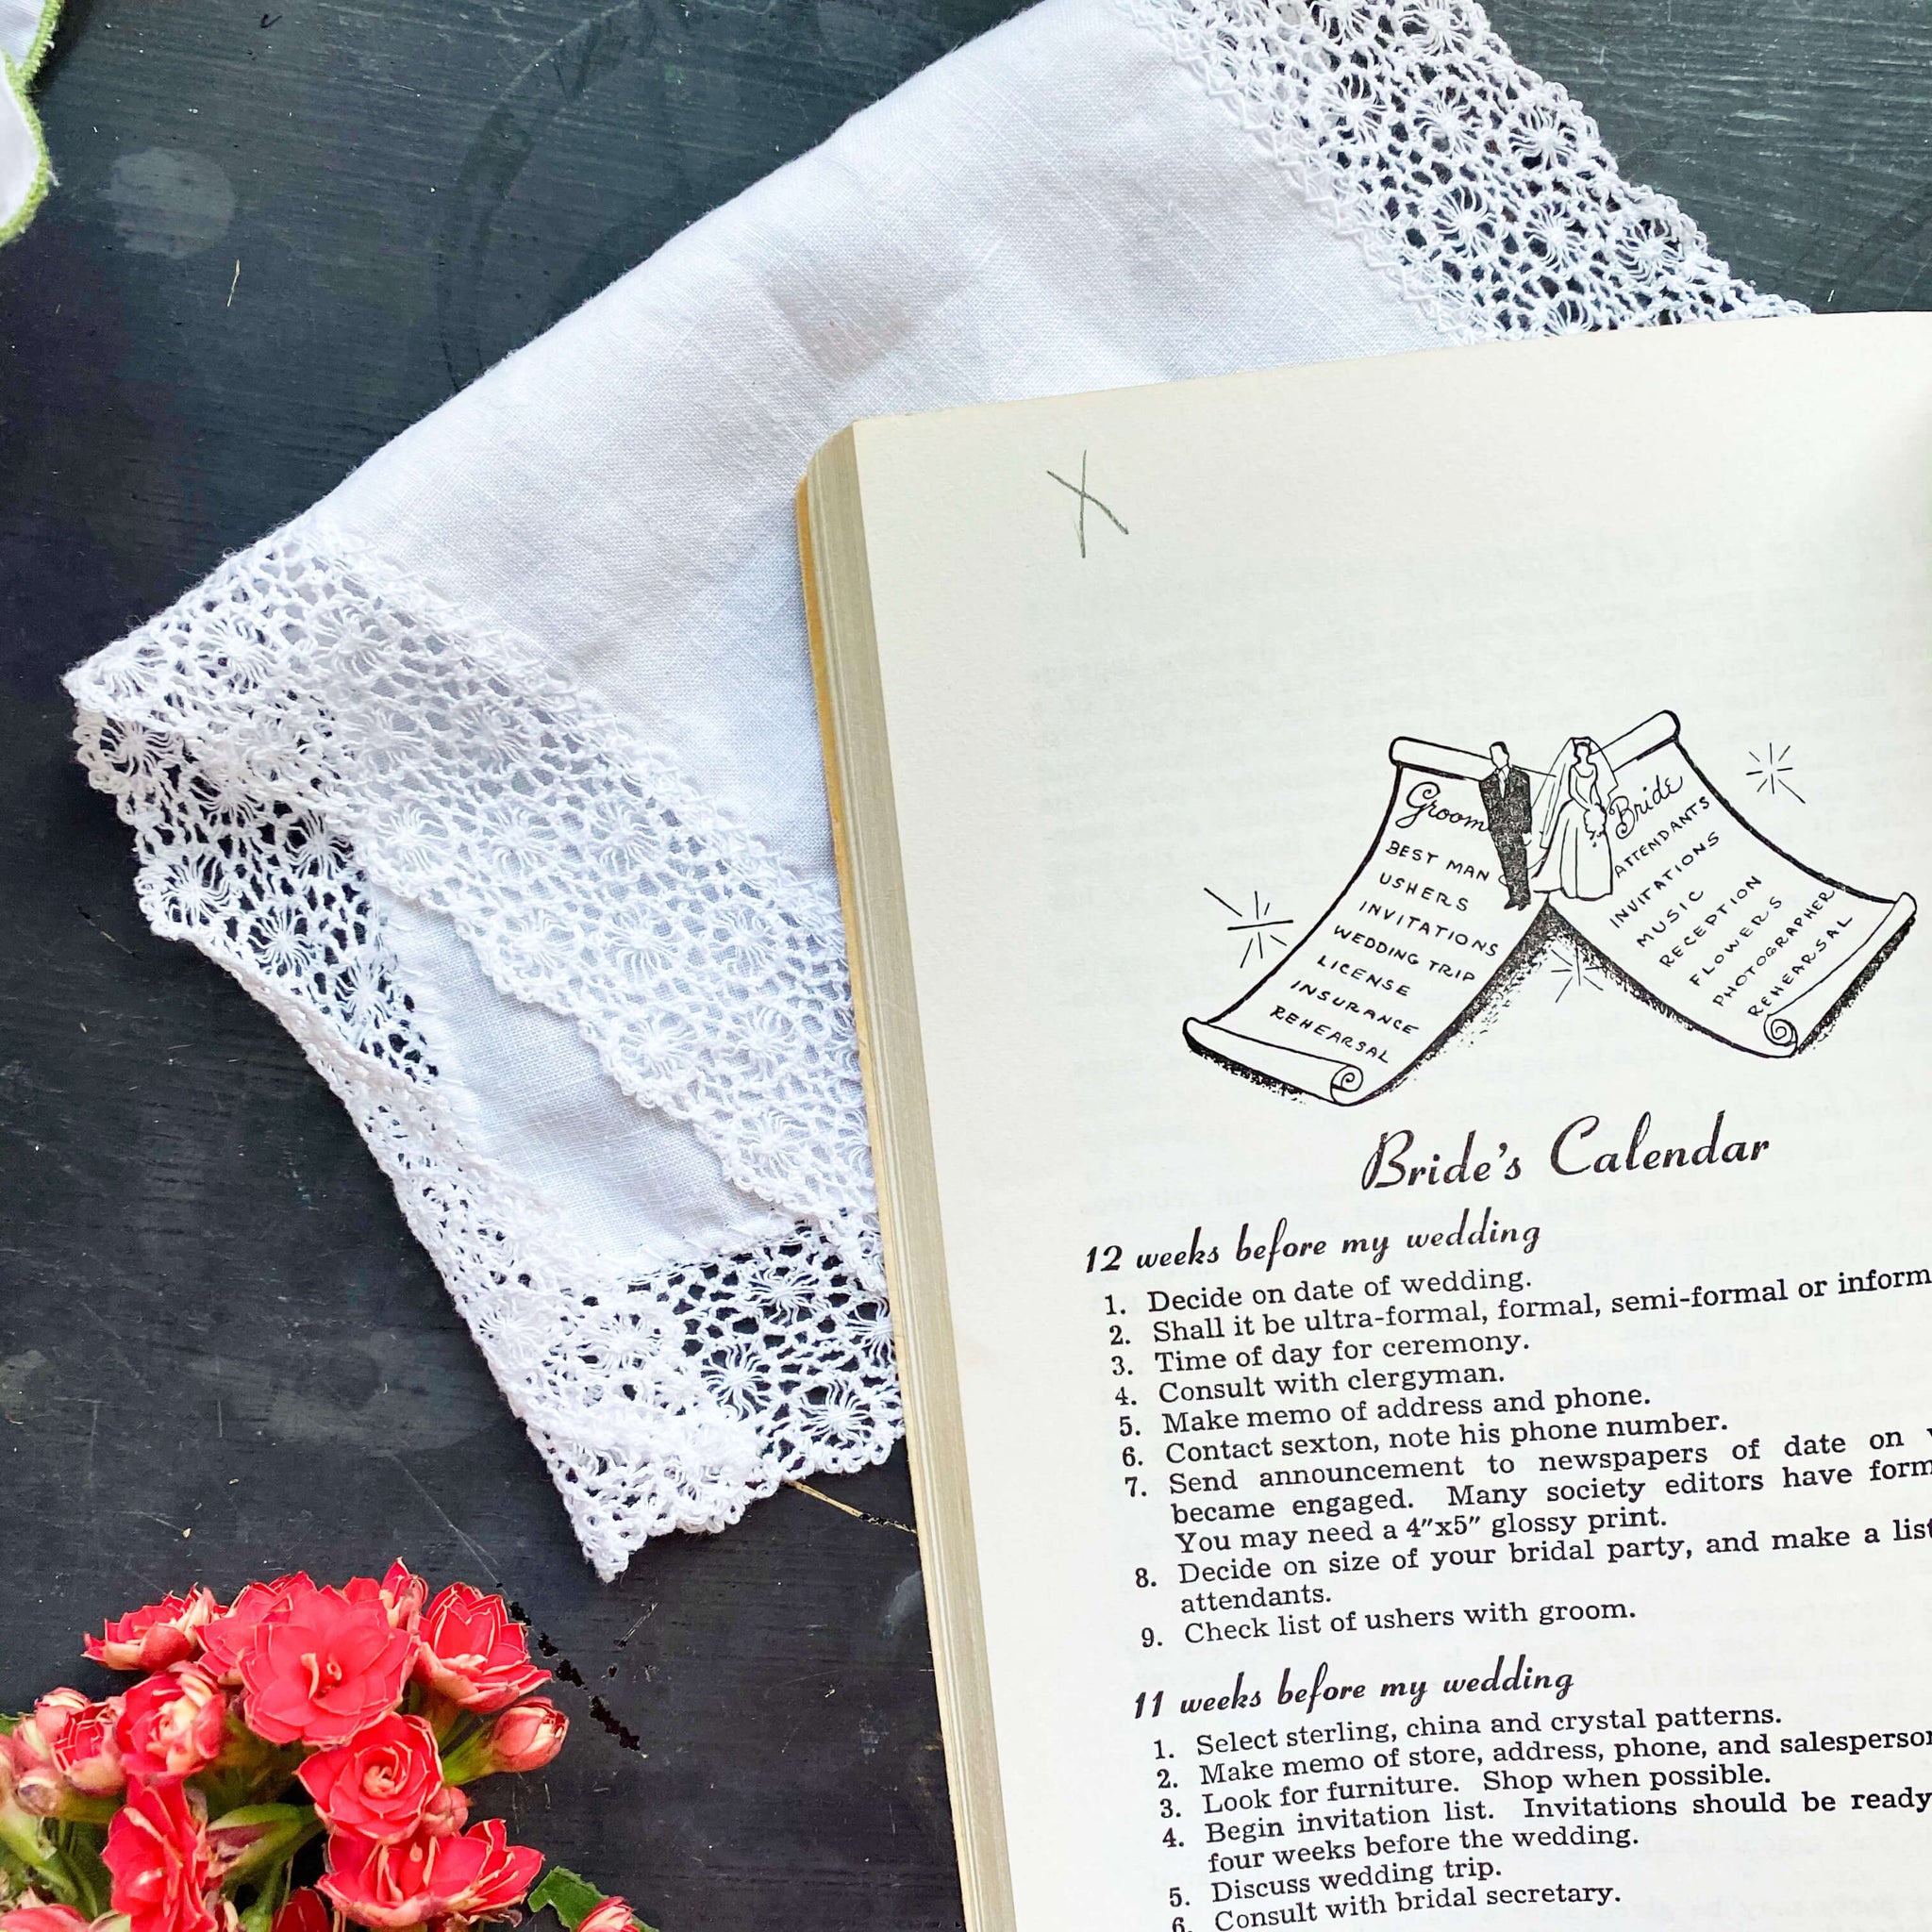 Vintage 1950s Wedding Guide - How to Plan a Beautiful Wedding by Sallie Newton - 1954 Edition